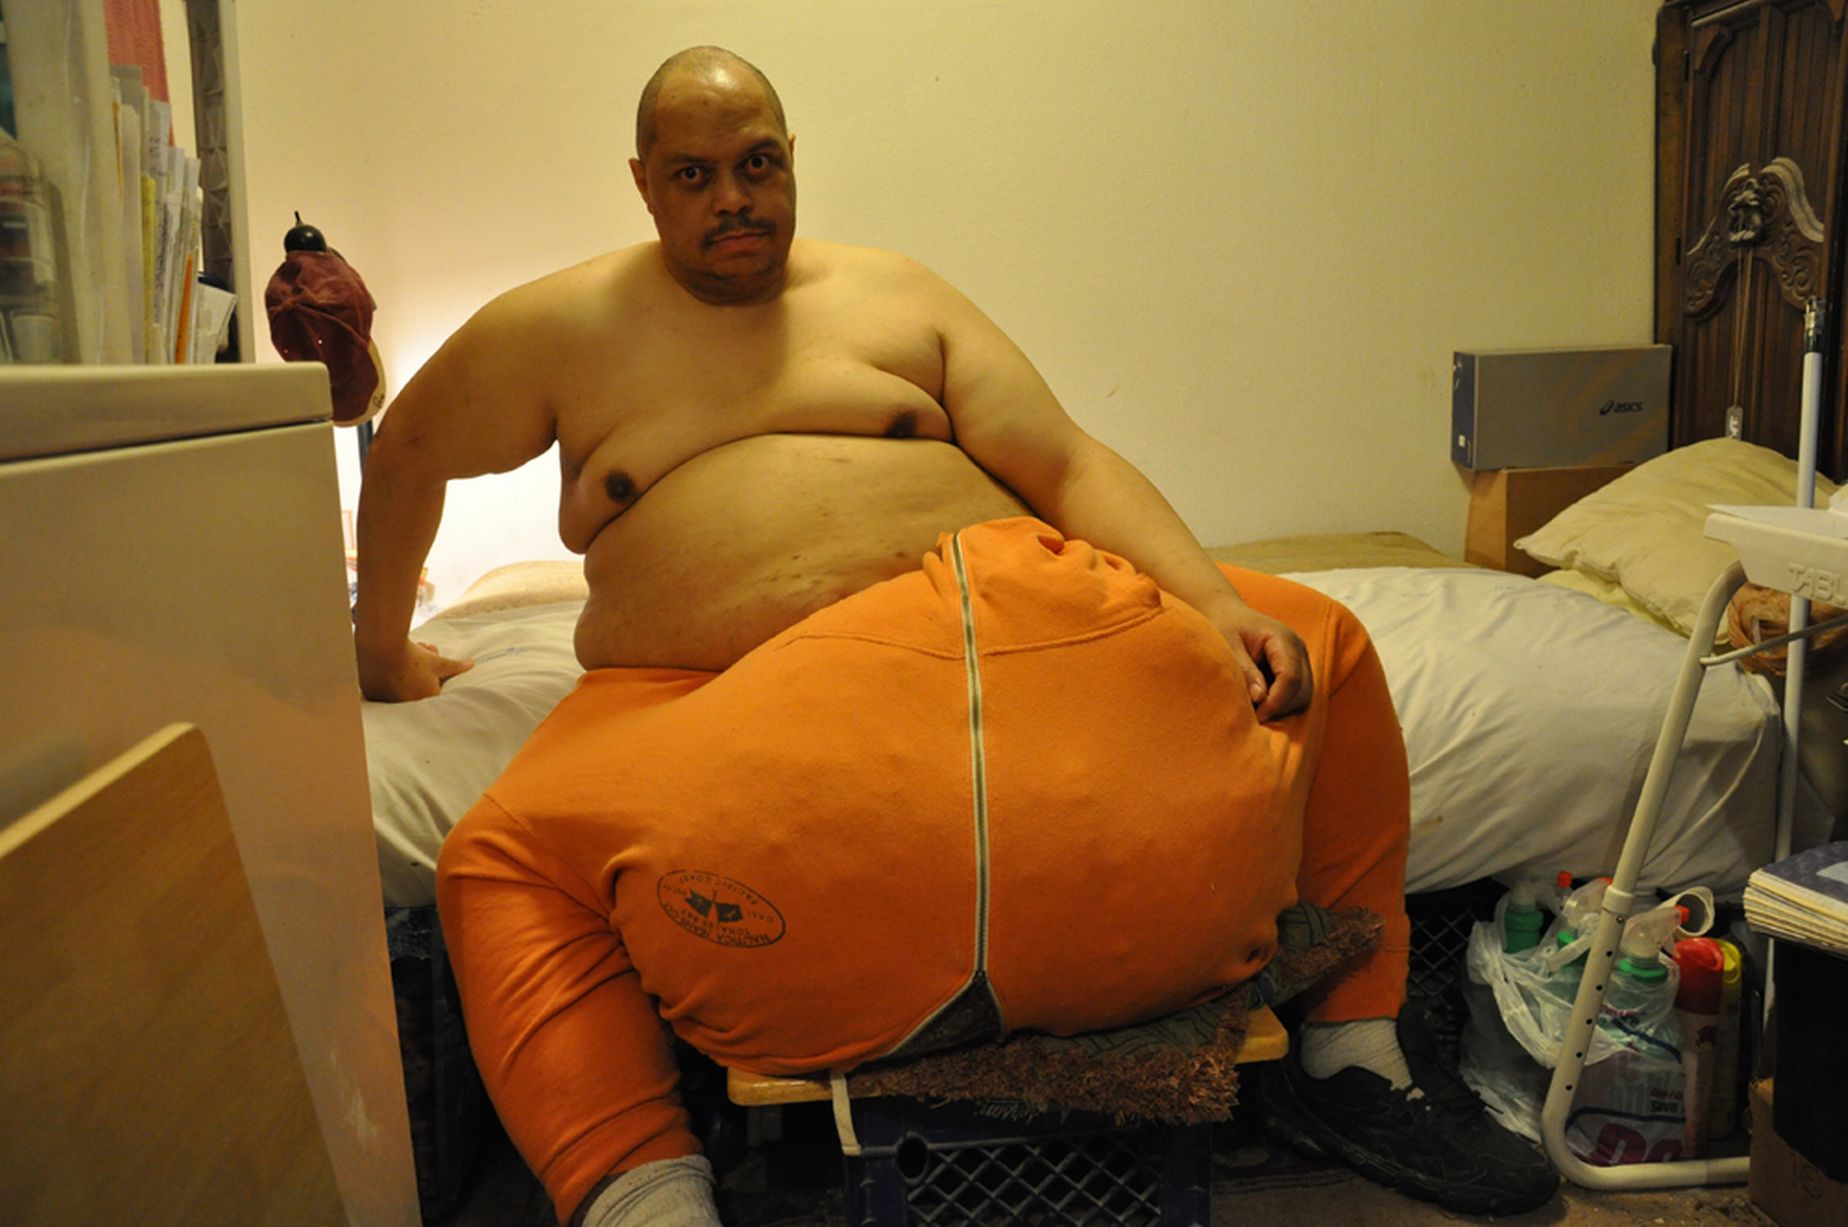 Wesley Warren Jr. brought attention to himself trying to raise the $1 

million necessary for surgery to have his 160 pound scrotum removed. 

In April 2013, a doctor offered to perform the surgery free of 

charge.